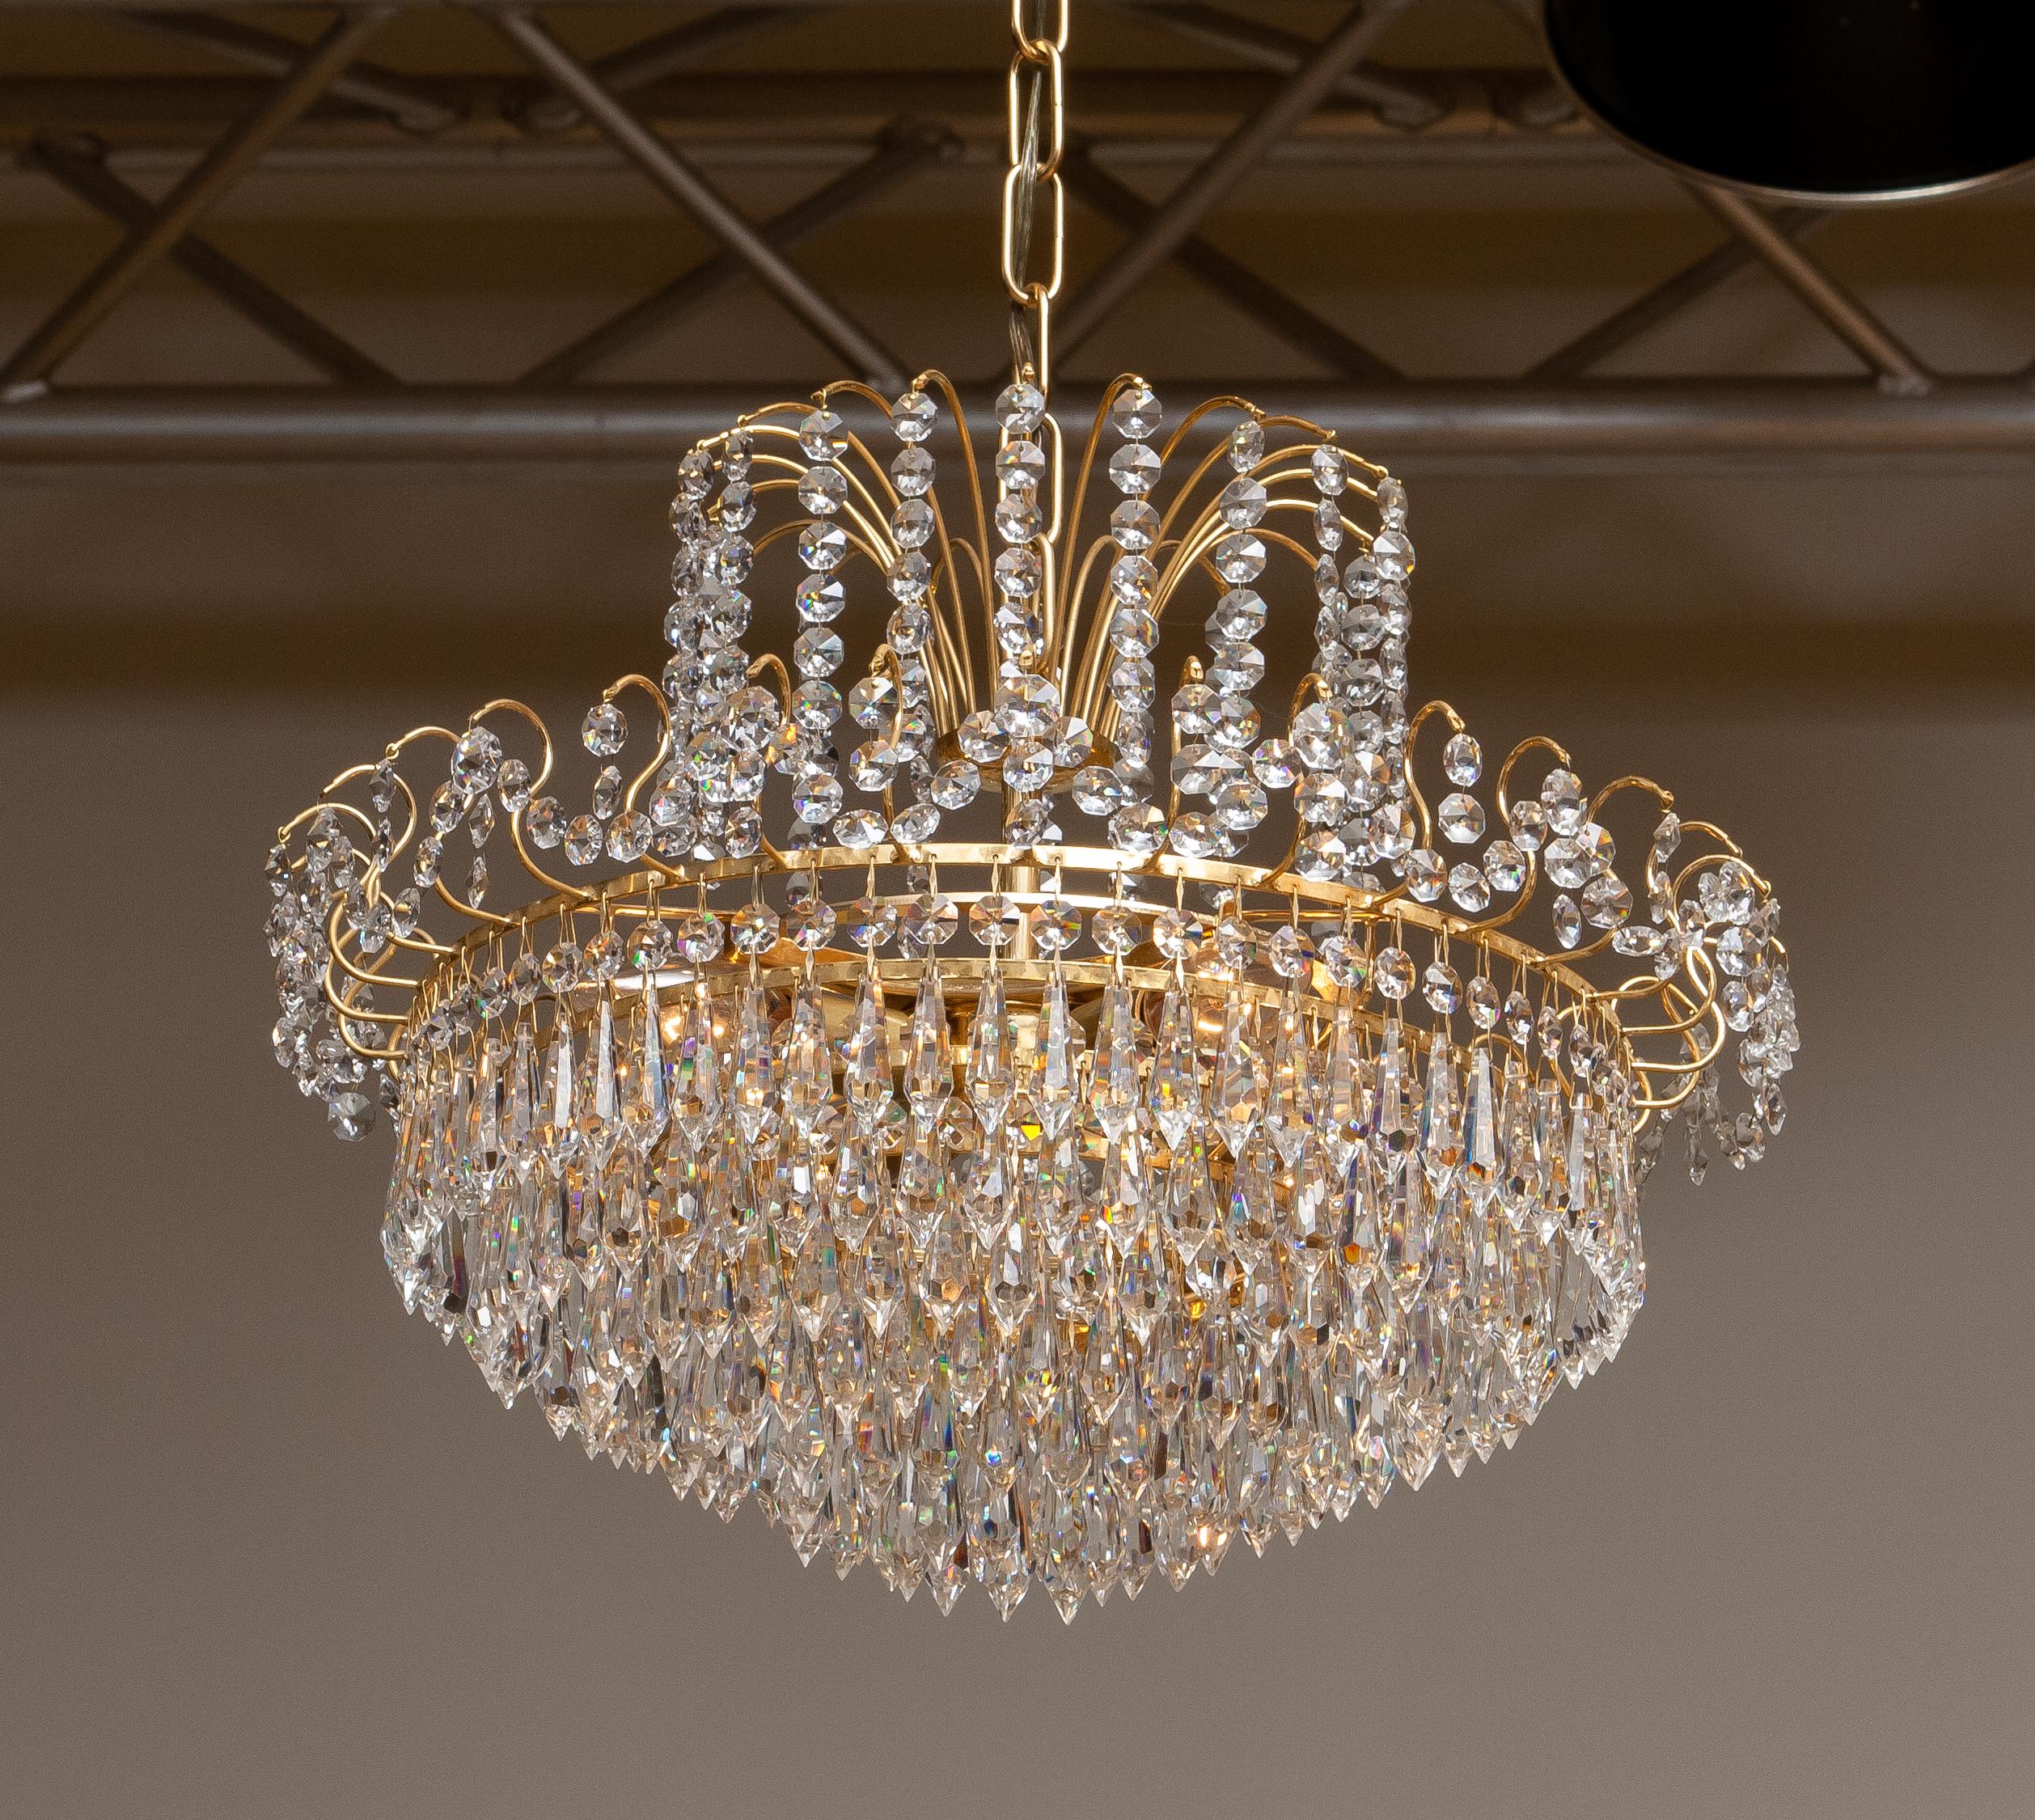 Neoclassical Revival 1970s, Gold-Plated and Faceted Crystal Chandelier Attributed to Reijmyre, Sweden For Sale